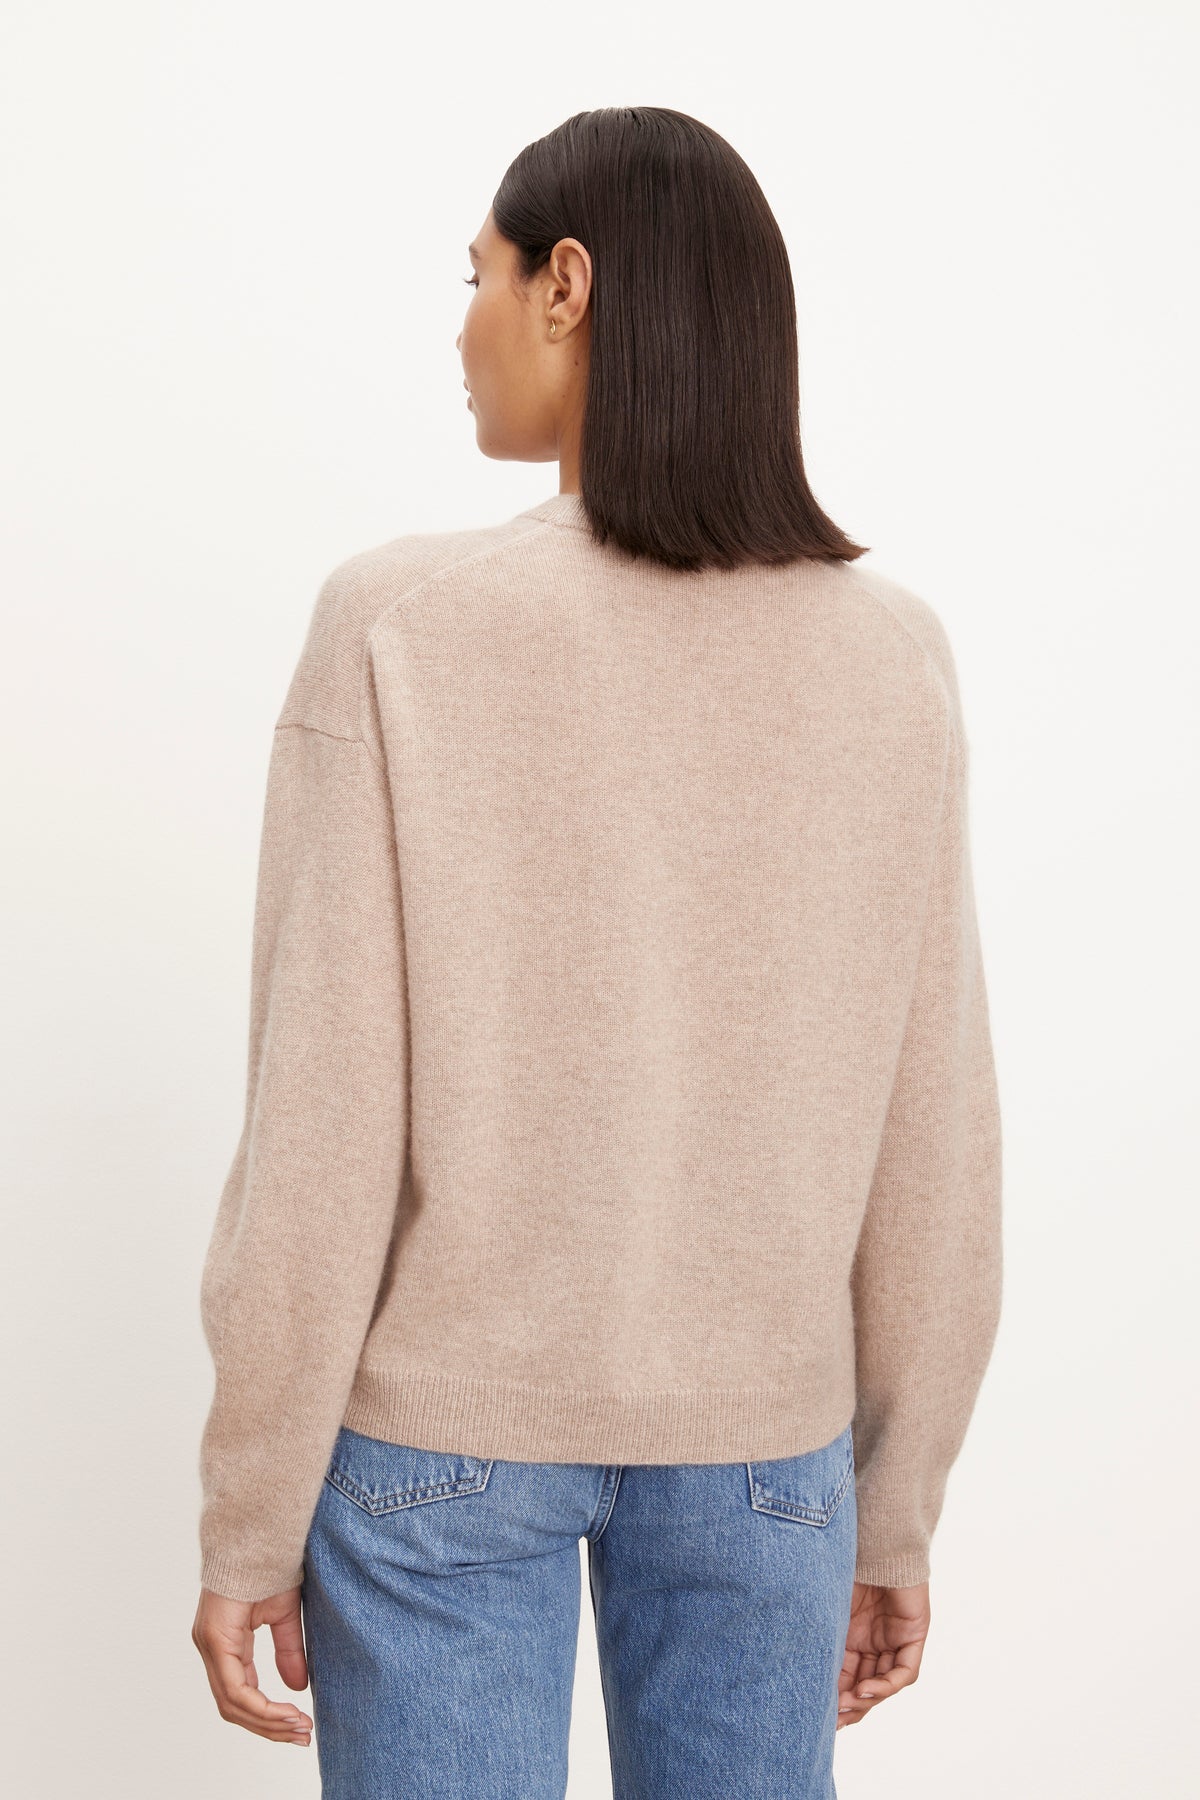   The back view of a woman wearing a Velvet by Graham & Spencer BRYNNE CASHMERE CREW NECK SWEATER and jeans. 